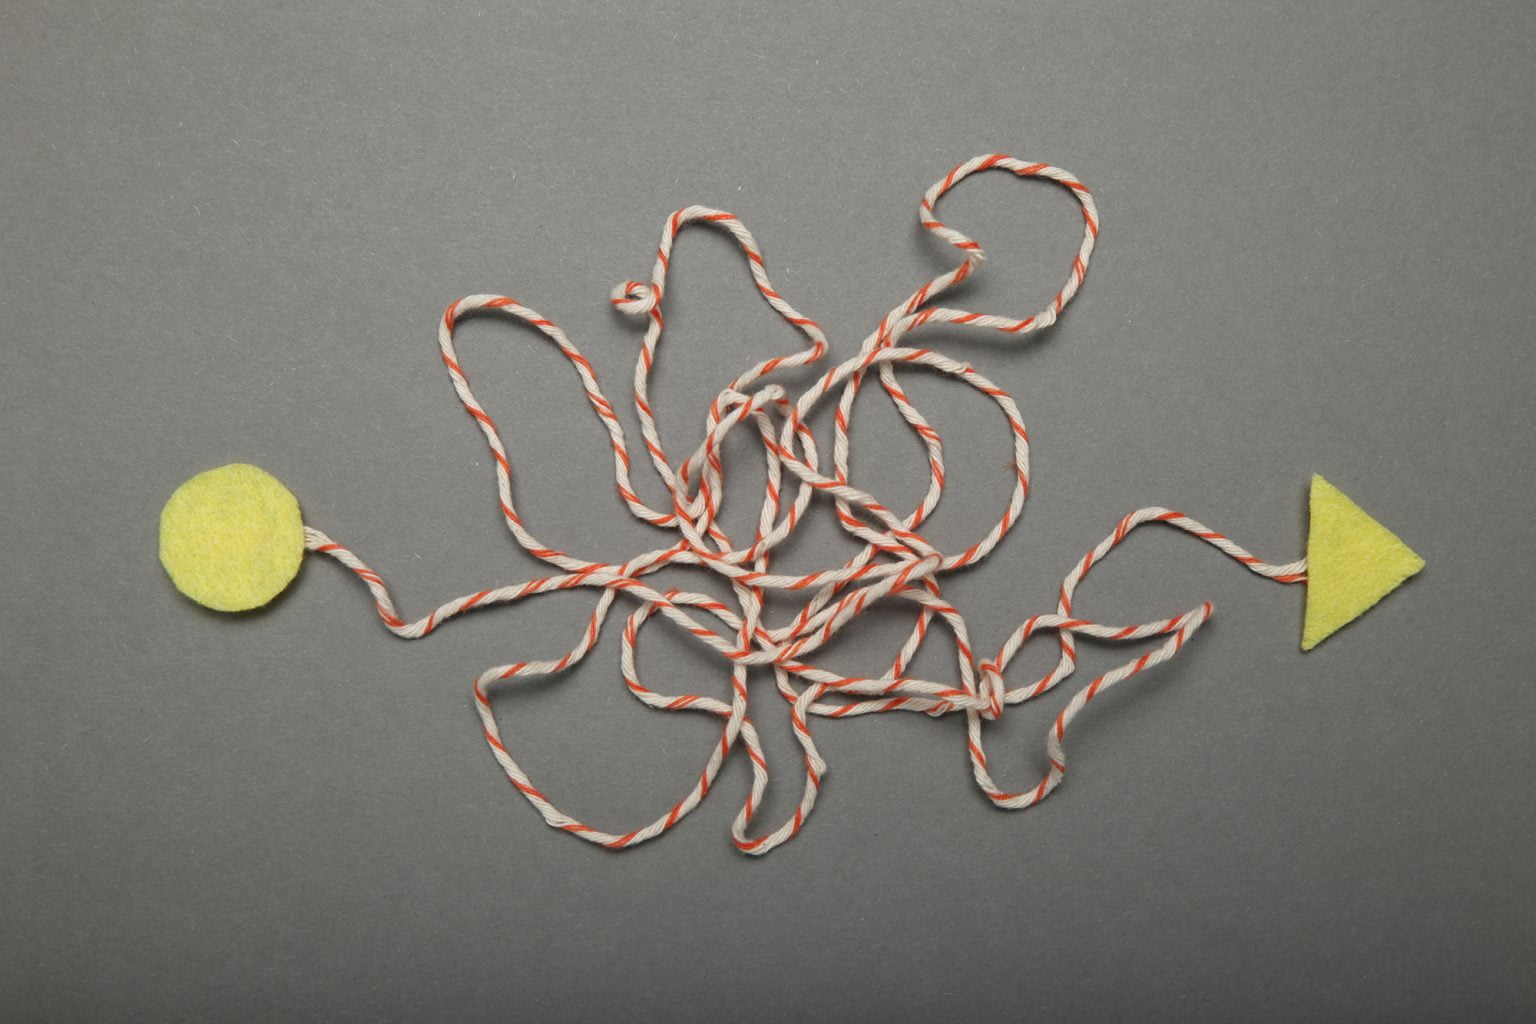 Tangled string with a circle on one side and an arrow on the other